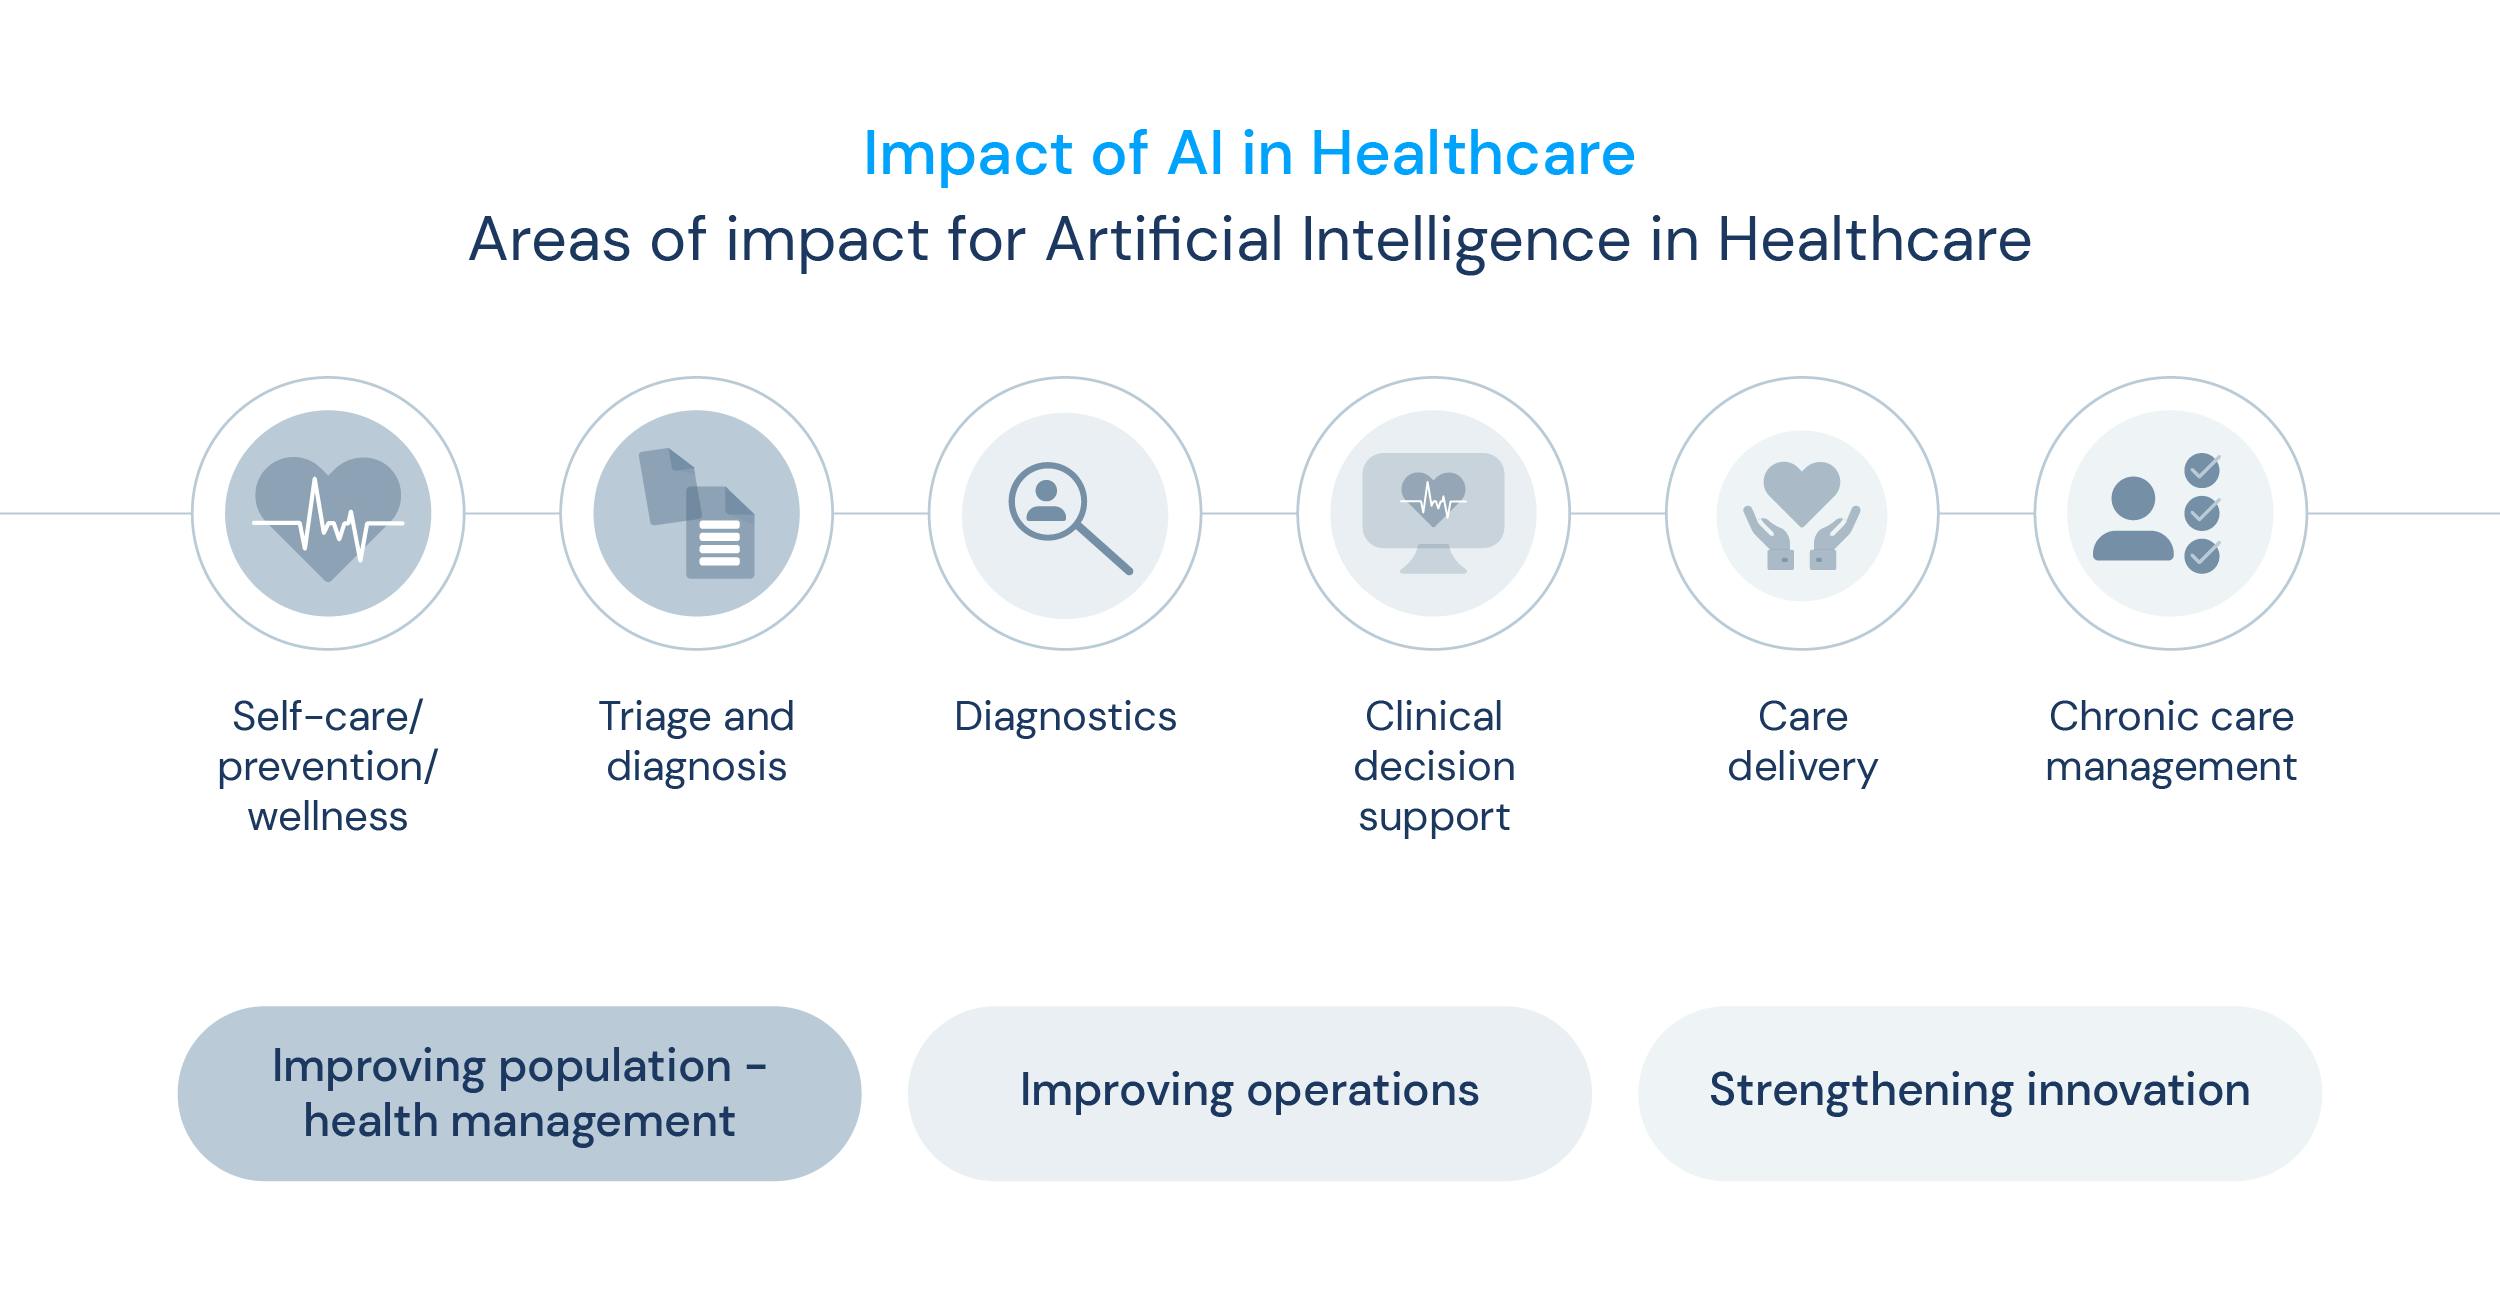 Impact of AI in healthcare